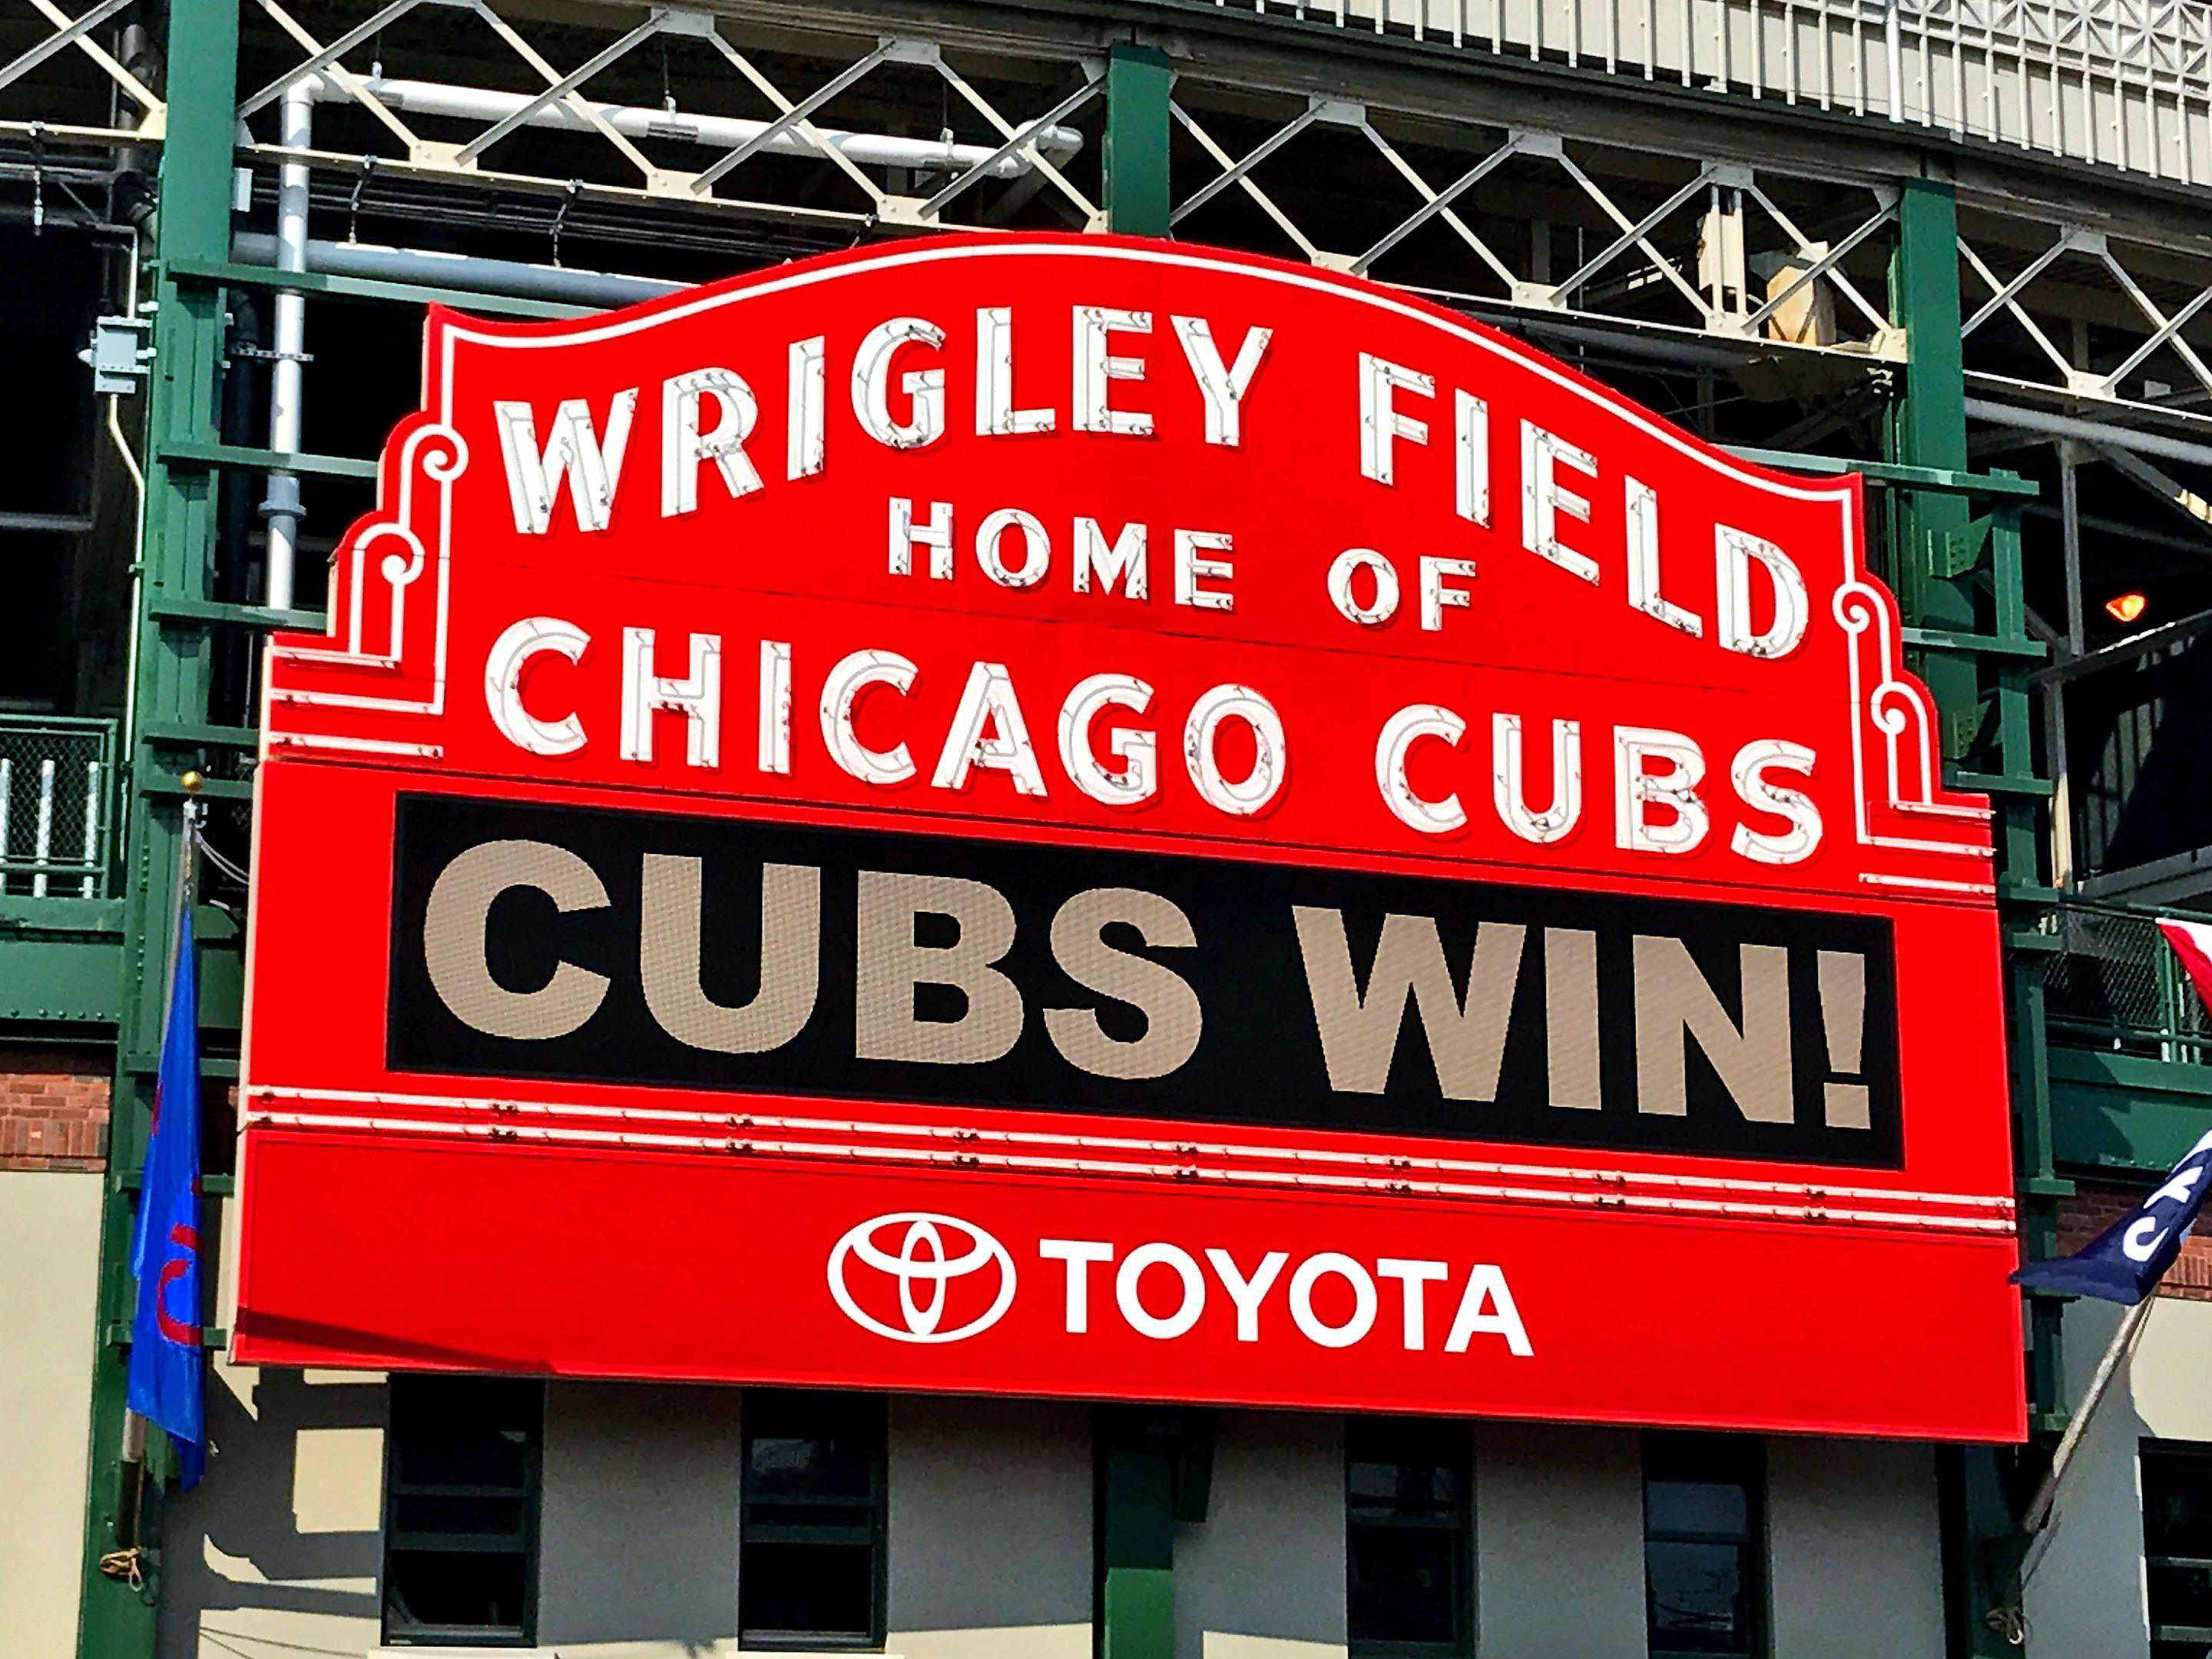 Catch a Cubs baseball game at the historic Wrigley Field